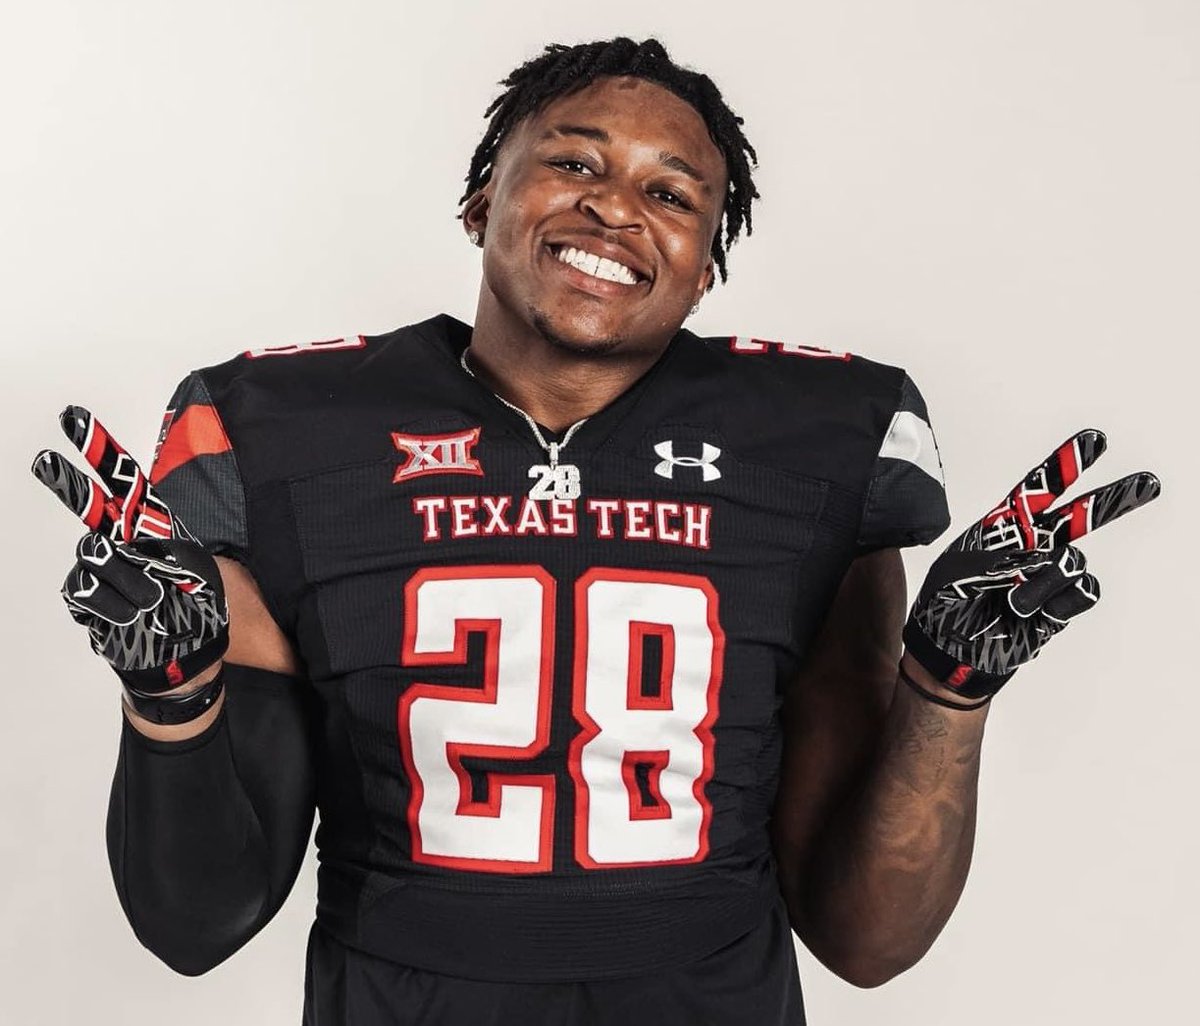 Thank you @CoachZFitch from @TexasTechFB for taking the time to stop by @ManorSeniorHS this morning to check out the @ManorHSFootball program 🔴⚫️🏈 #RecruitManor